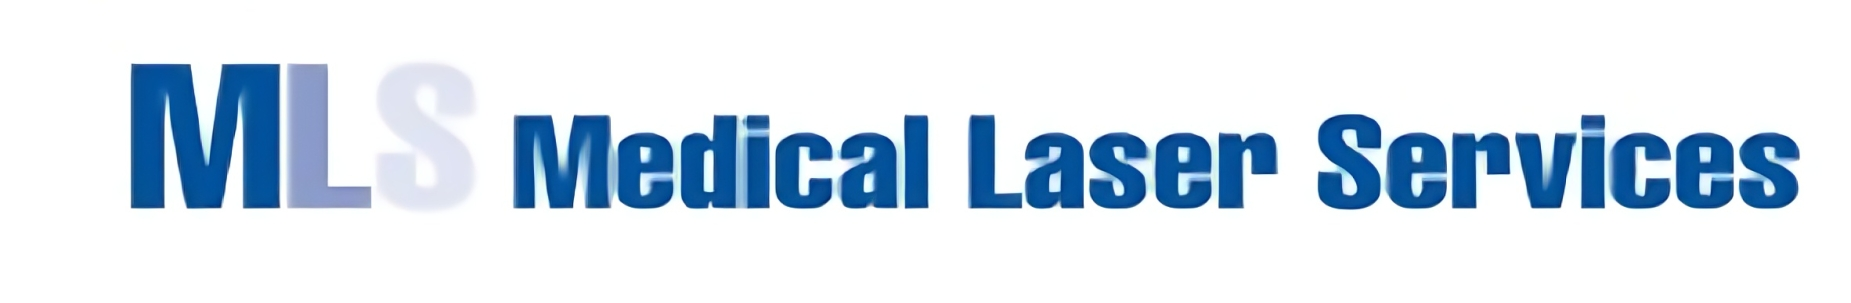 Medical Laser Services Corp